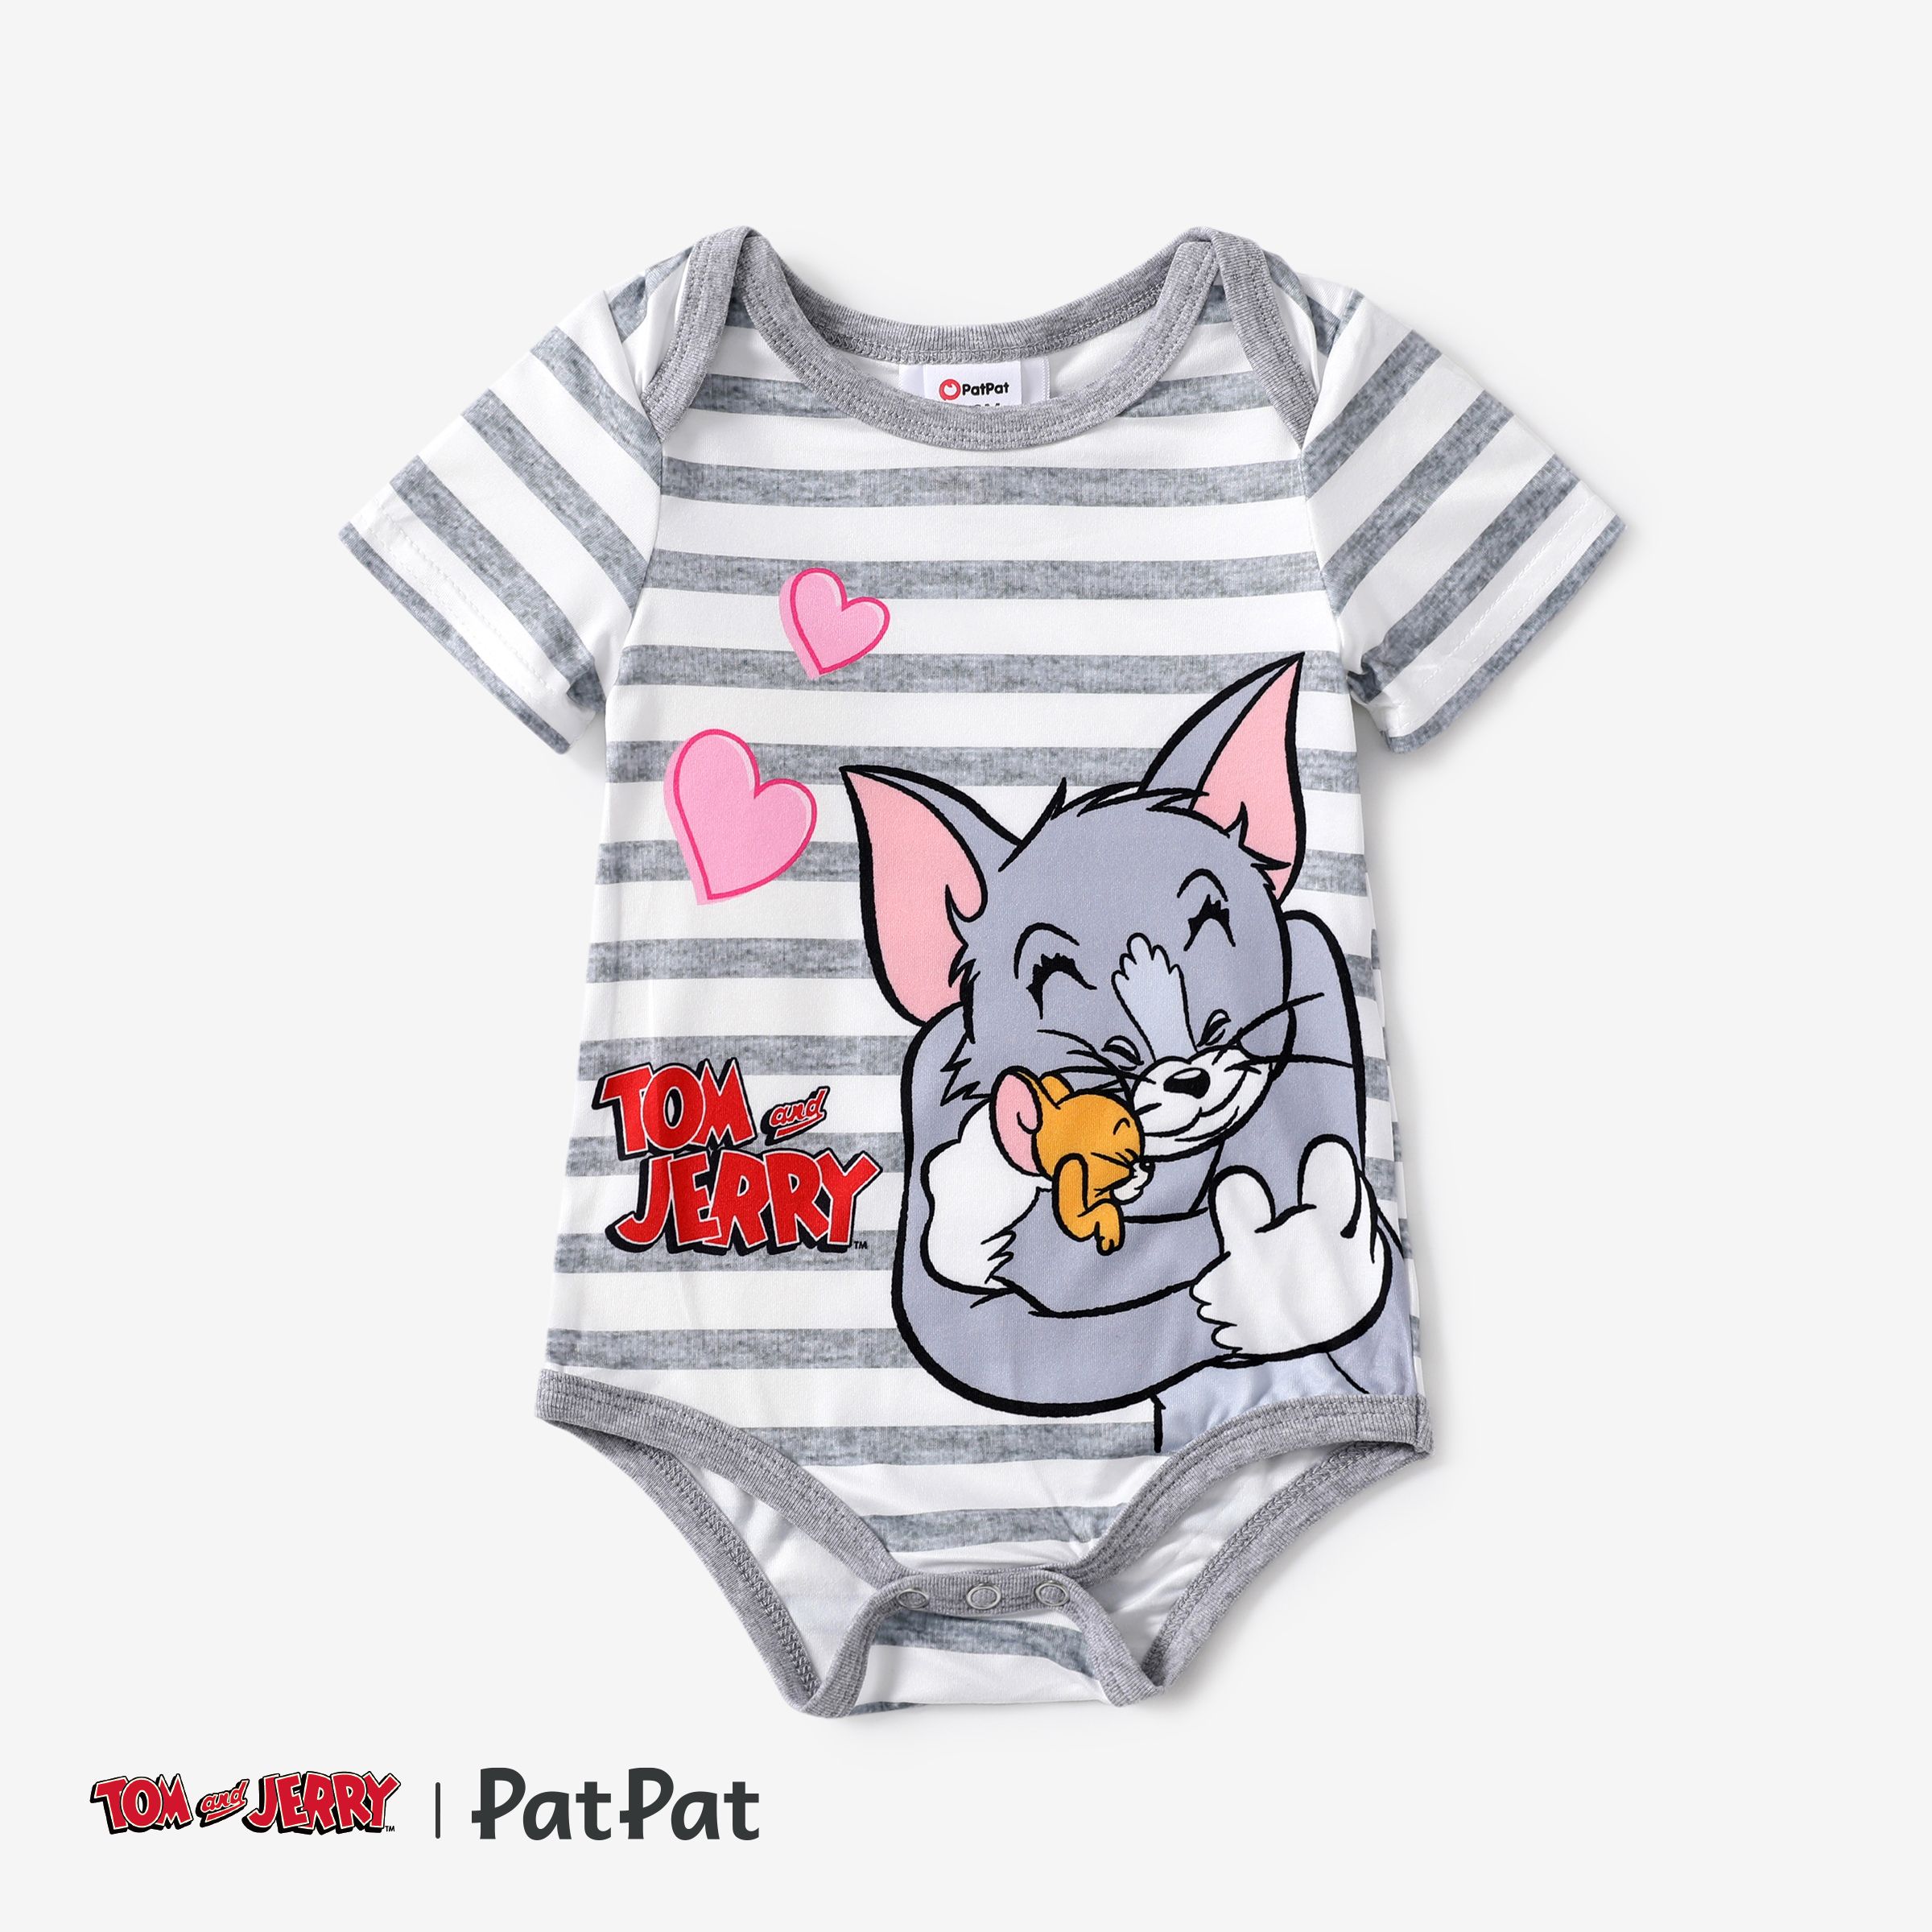 [0M-24M] Go-Neat Water Repellent and Stain Resistant Baby Boy/Girl Letter Print Short-sleeve Romper